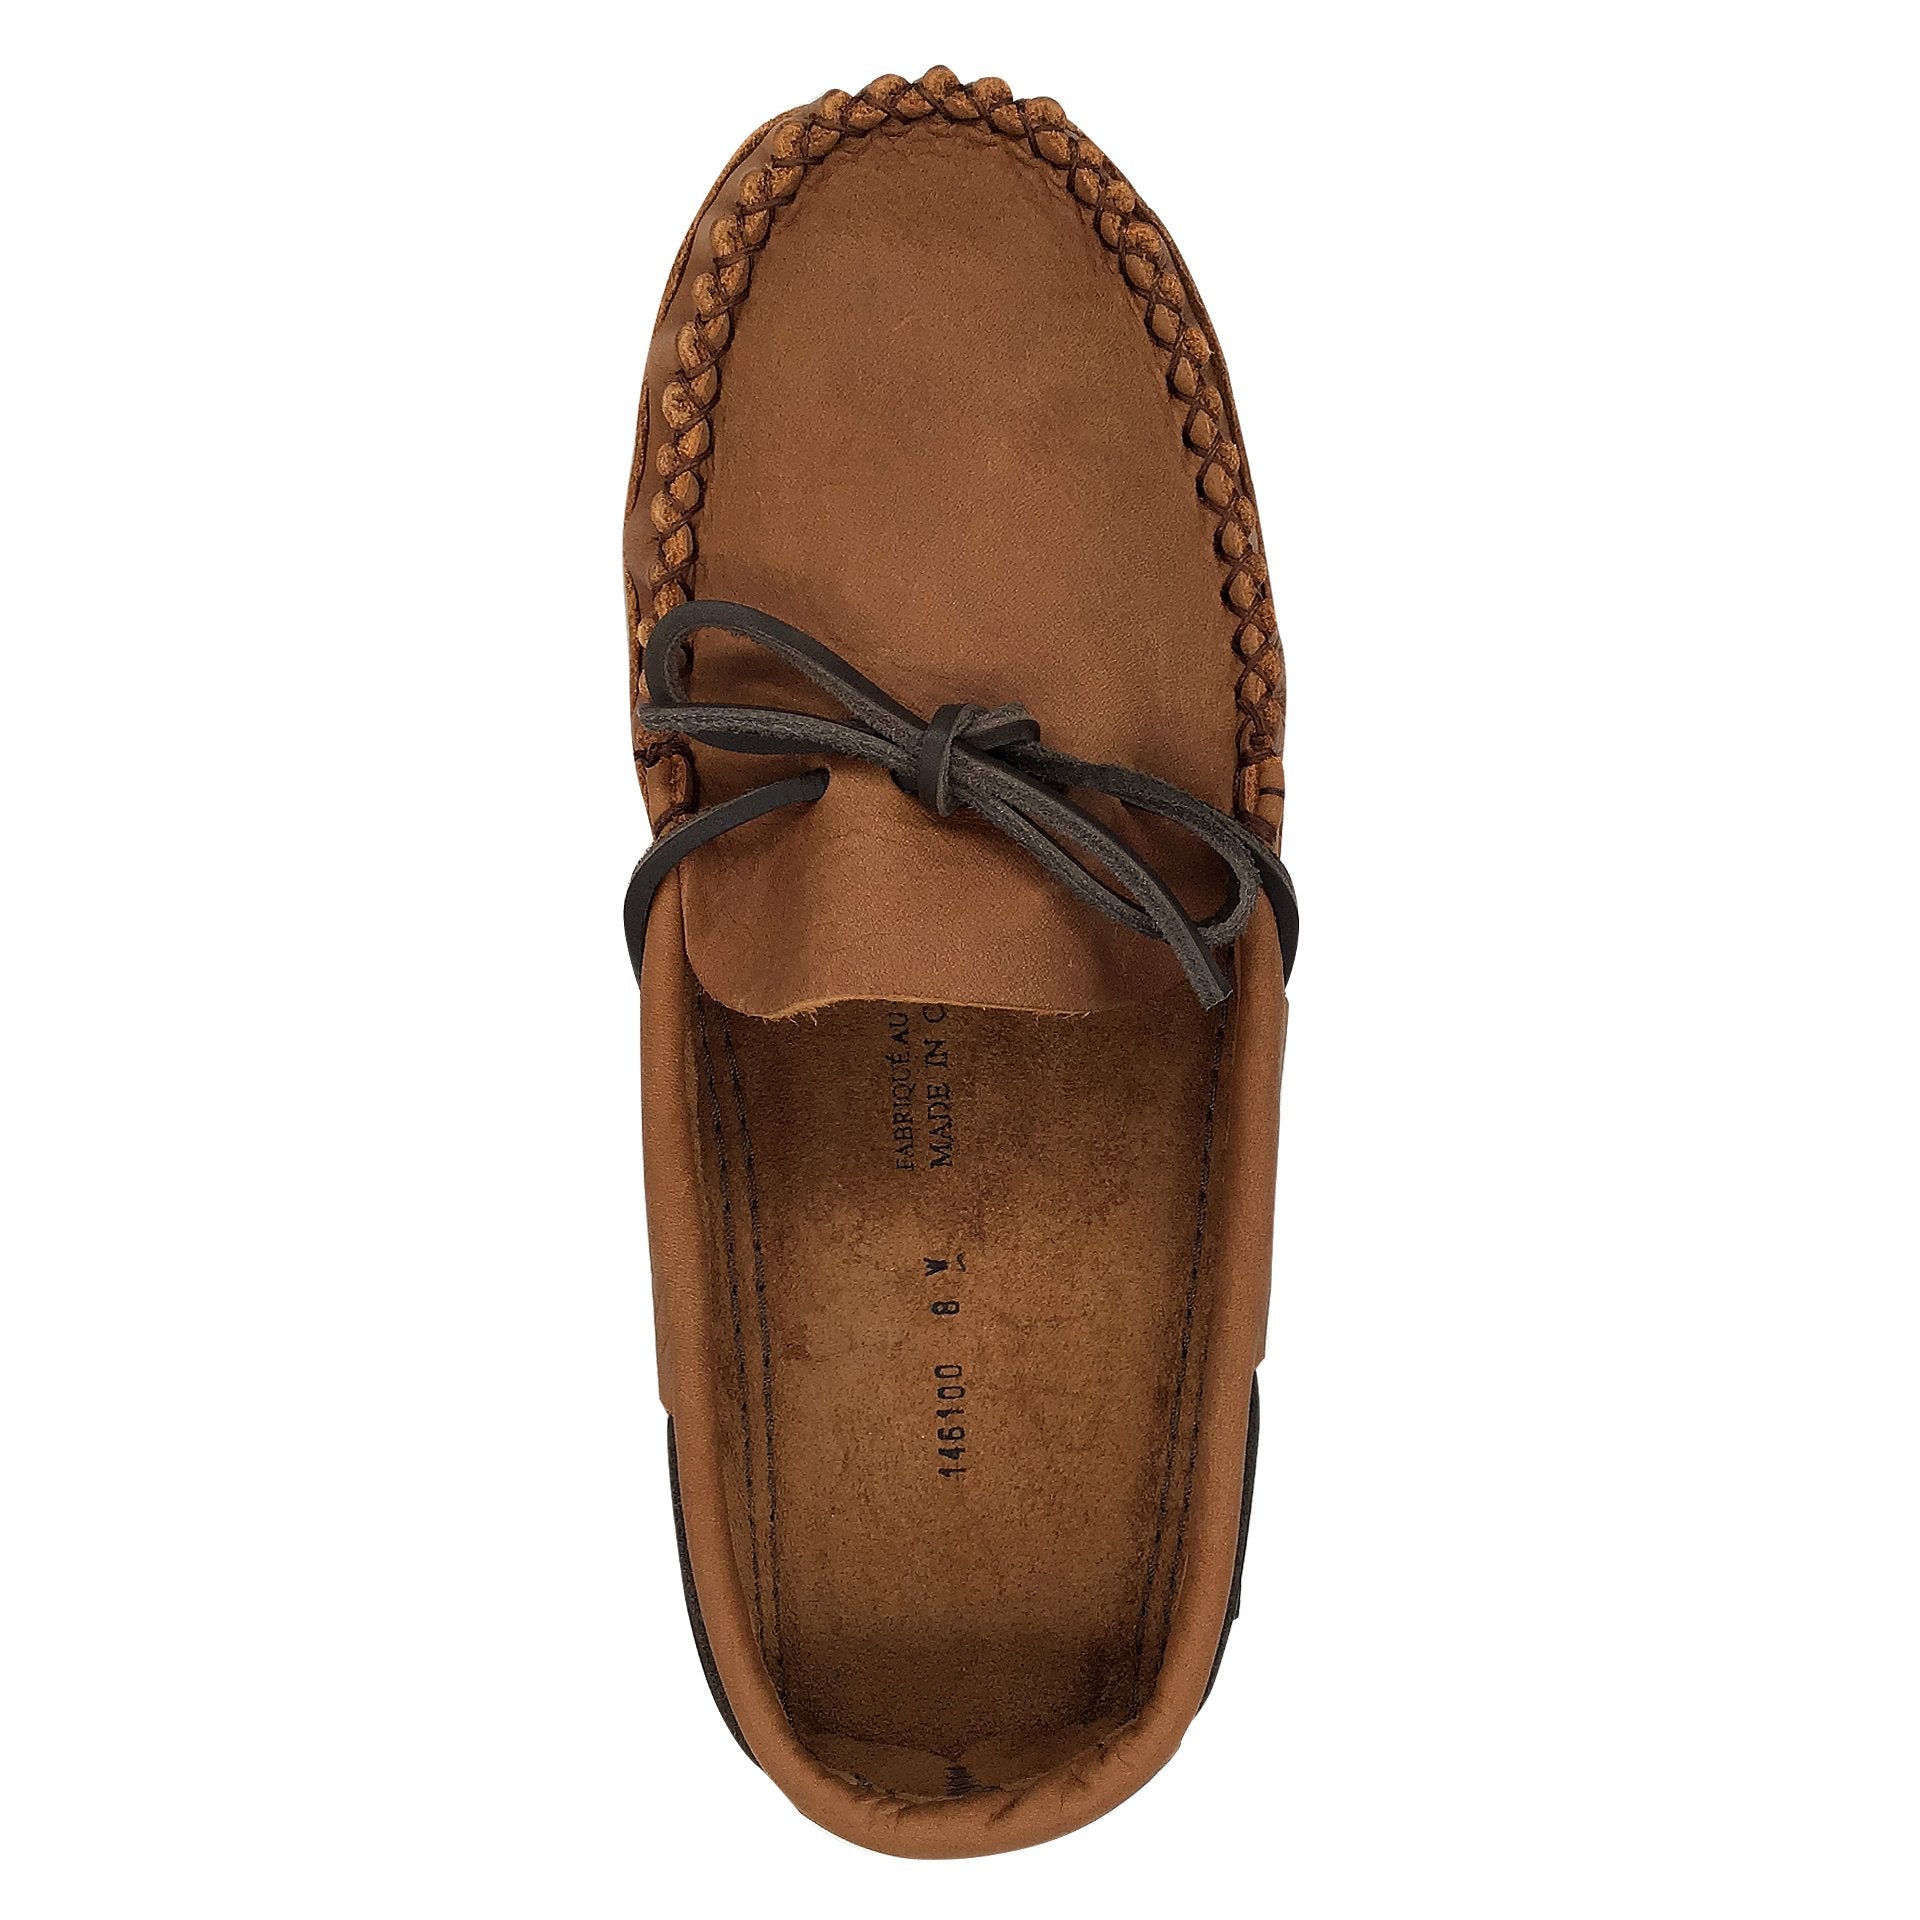 Men's Earthing Moccasins Wide Leather